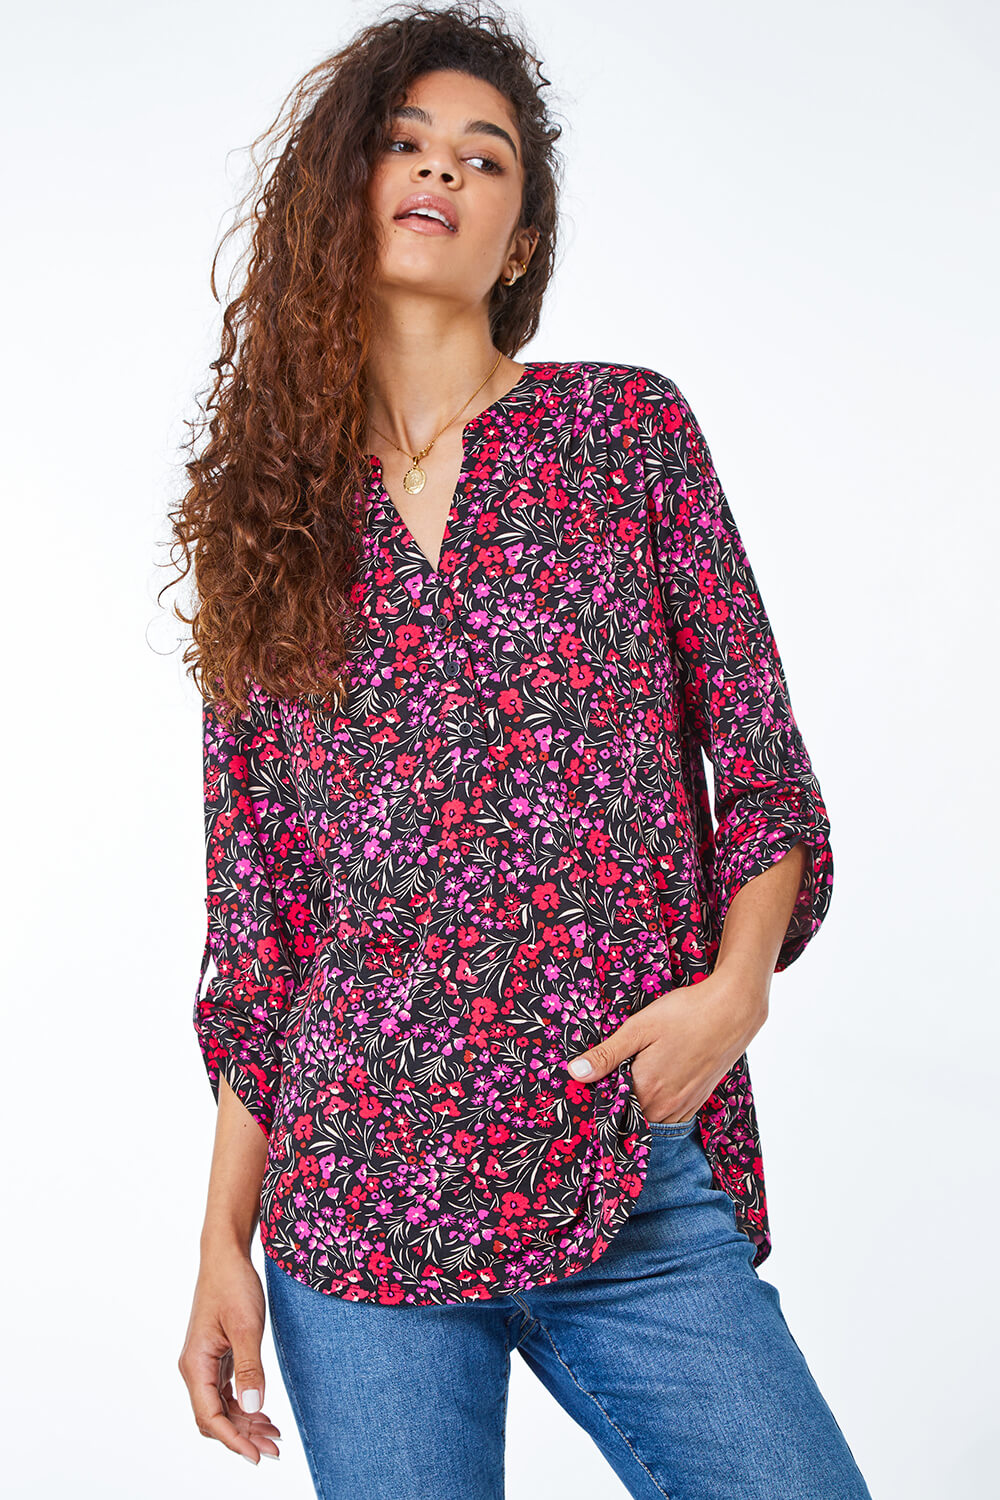 PINK Ditsy Floral Print Jersey Shirt, Image 2 of 5